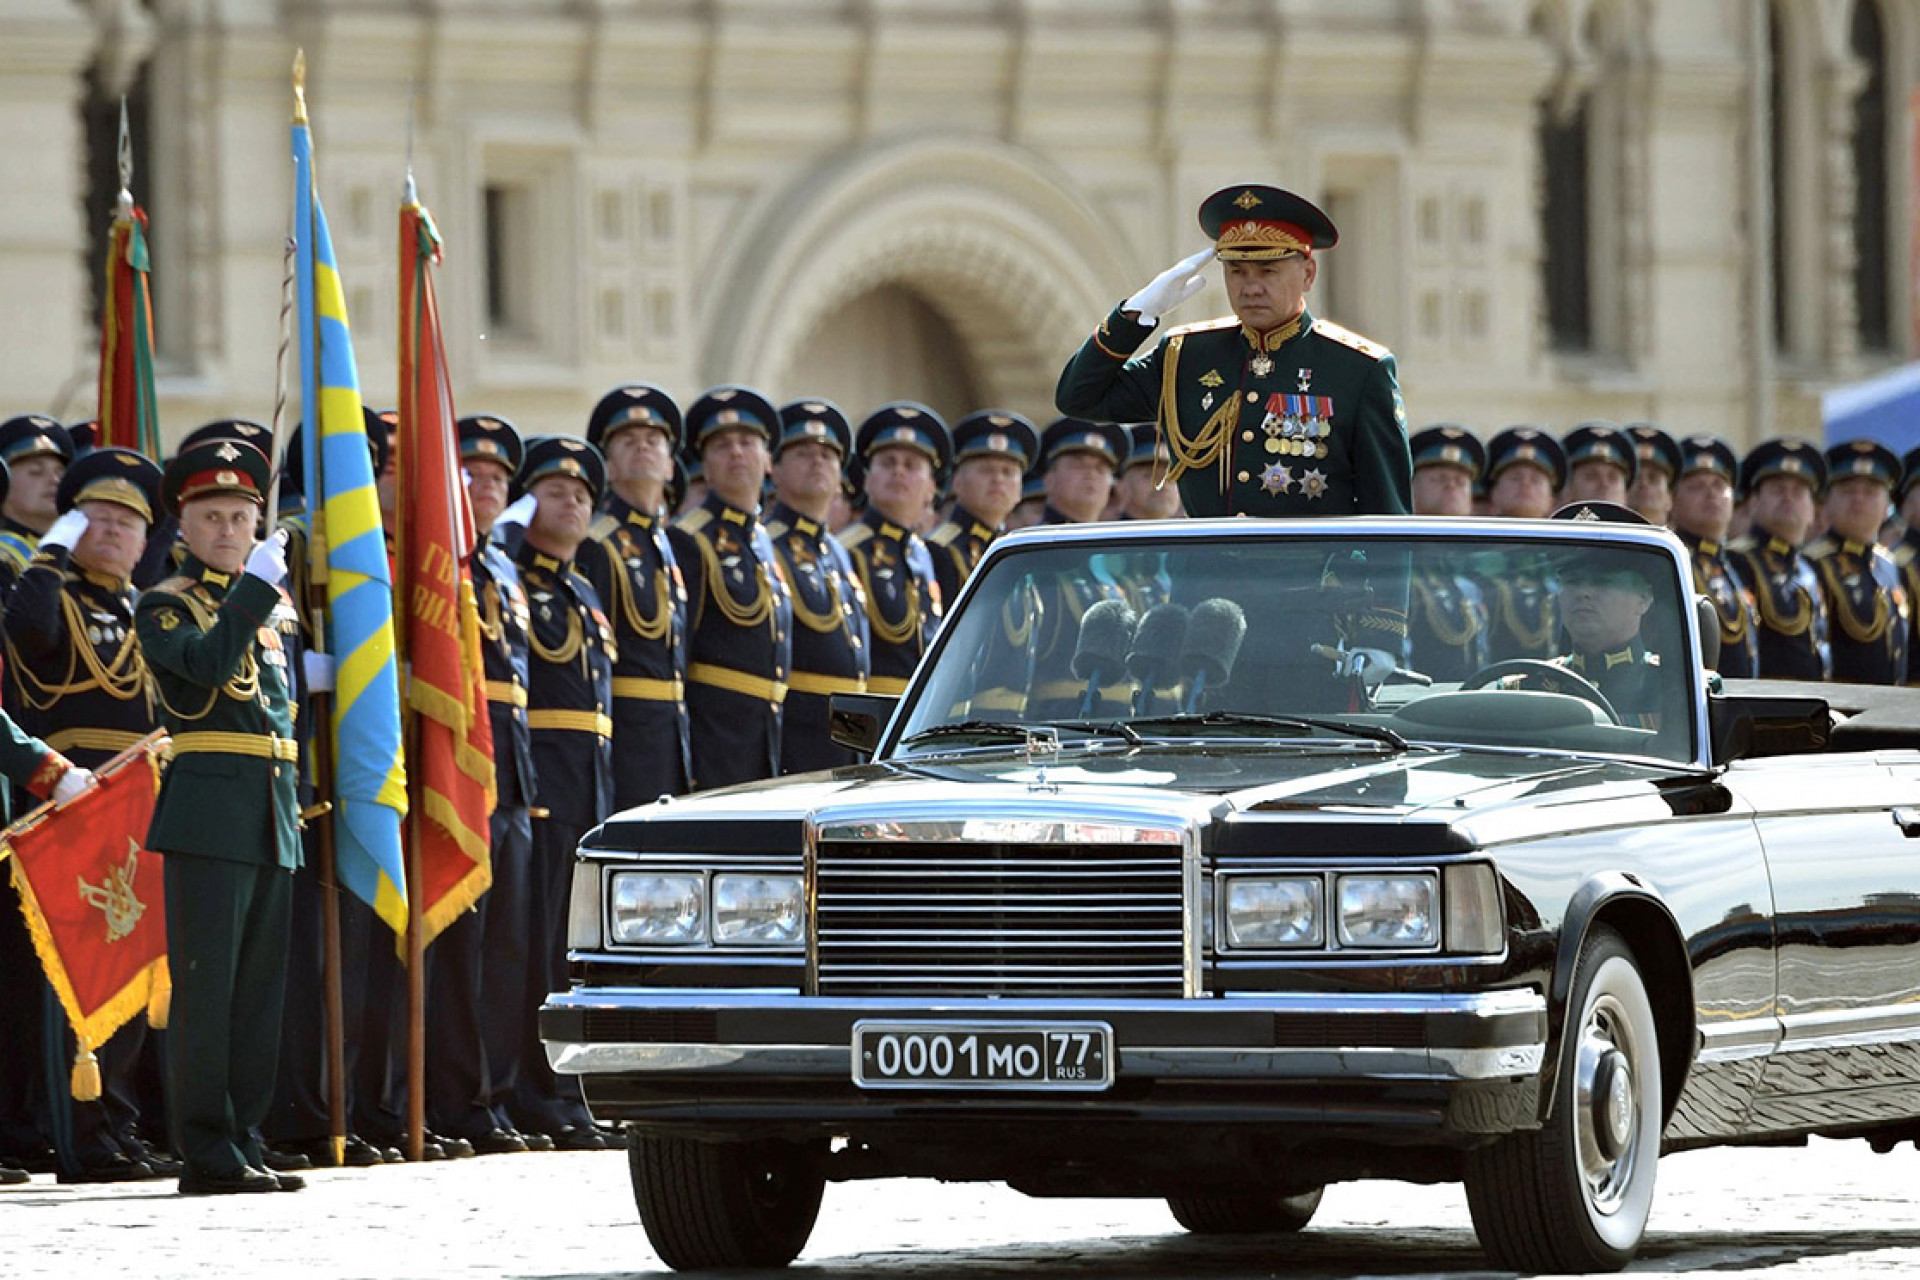 Moscow's Victory Day Military Parade, in Photos